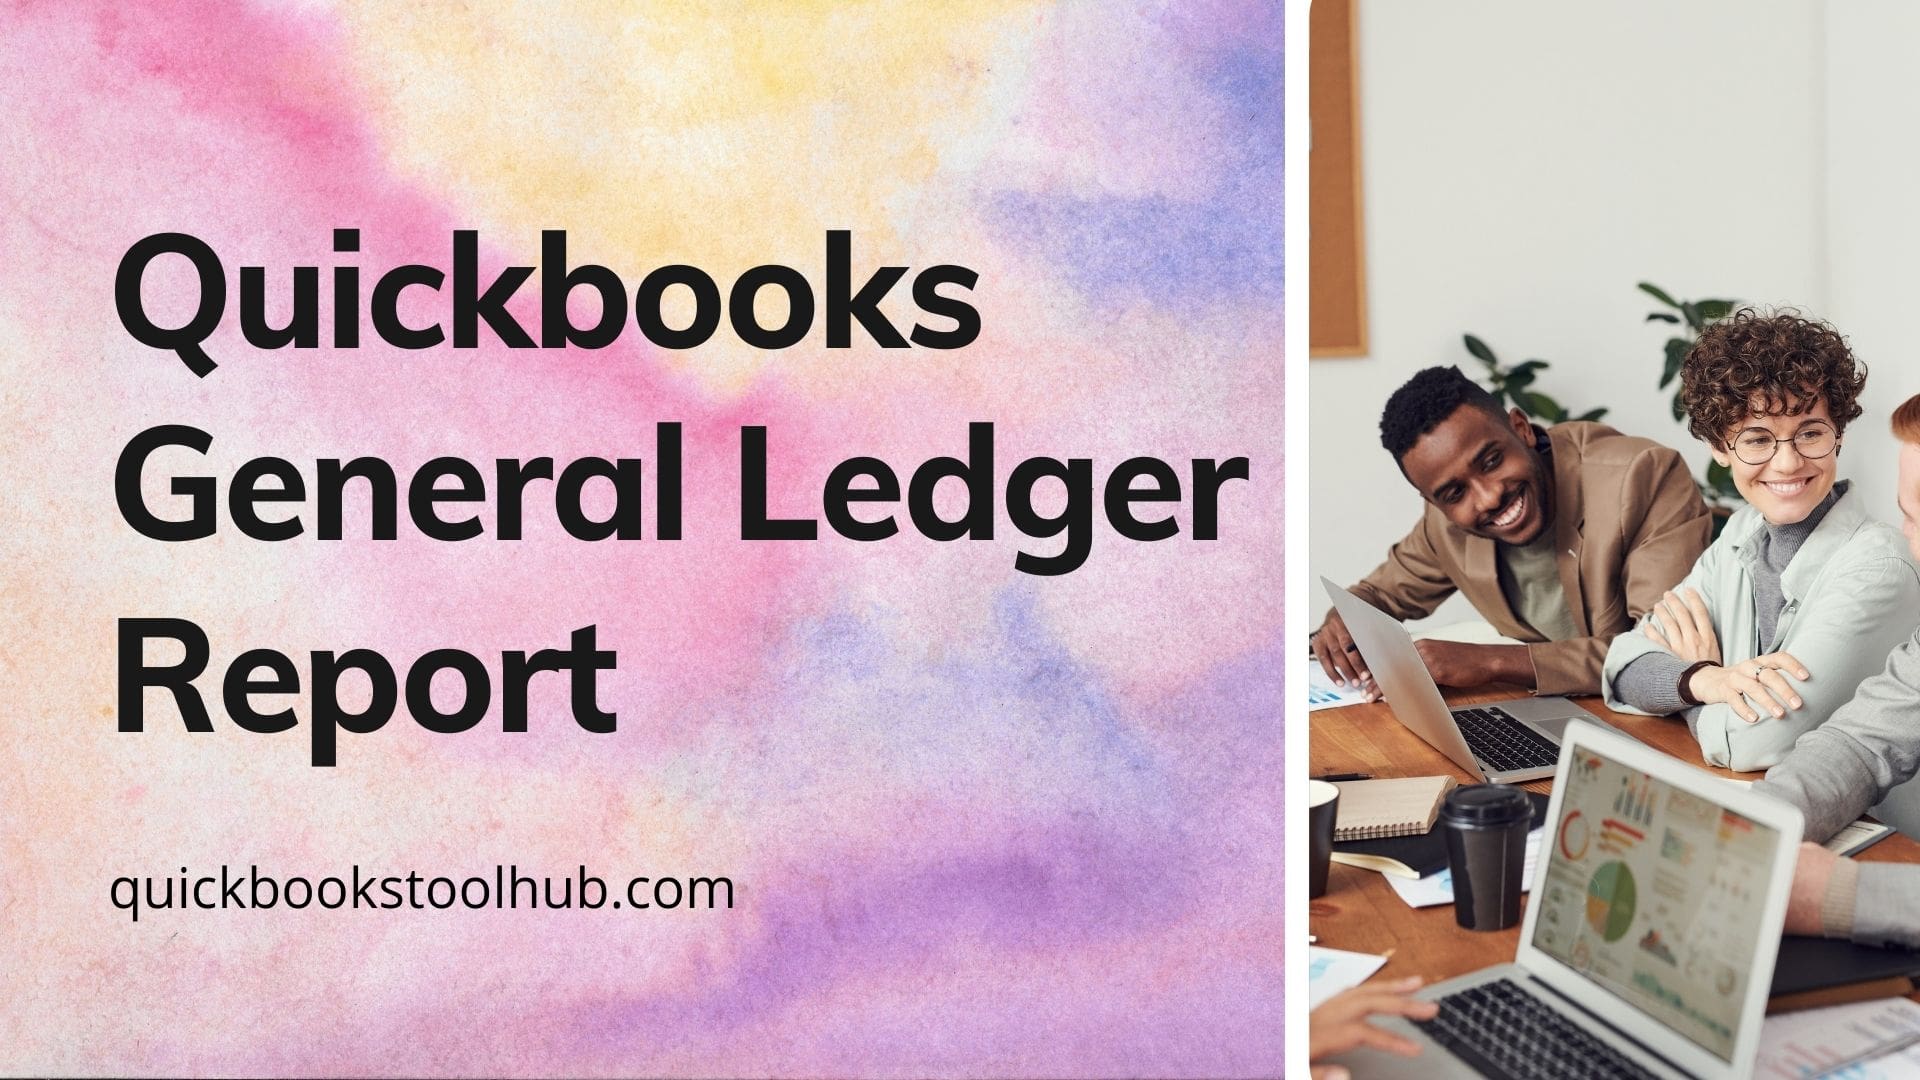 How to Make & Find the Quickbooks General Ledger Report?